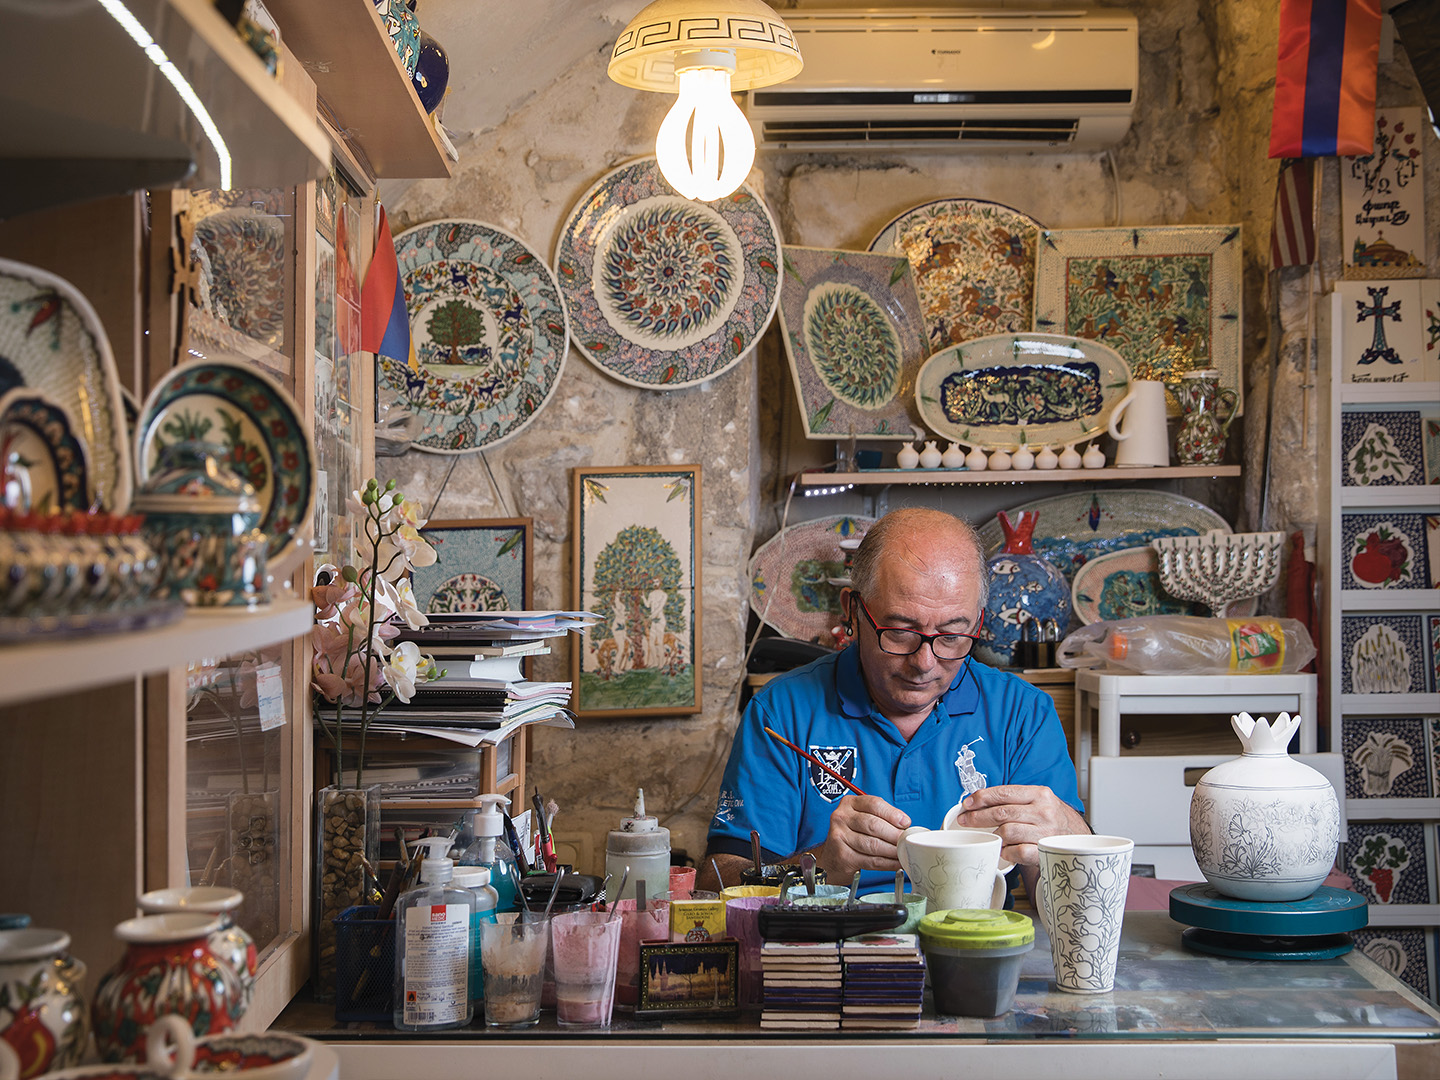 Ceramics artist Garo Sandrouni working in his shop in the Armenian Quarter. His two brothers, Harout and George, also have their own ceramic establishments.